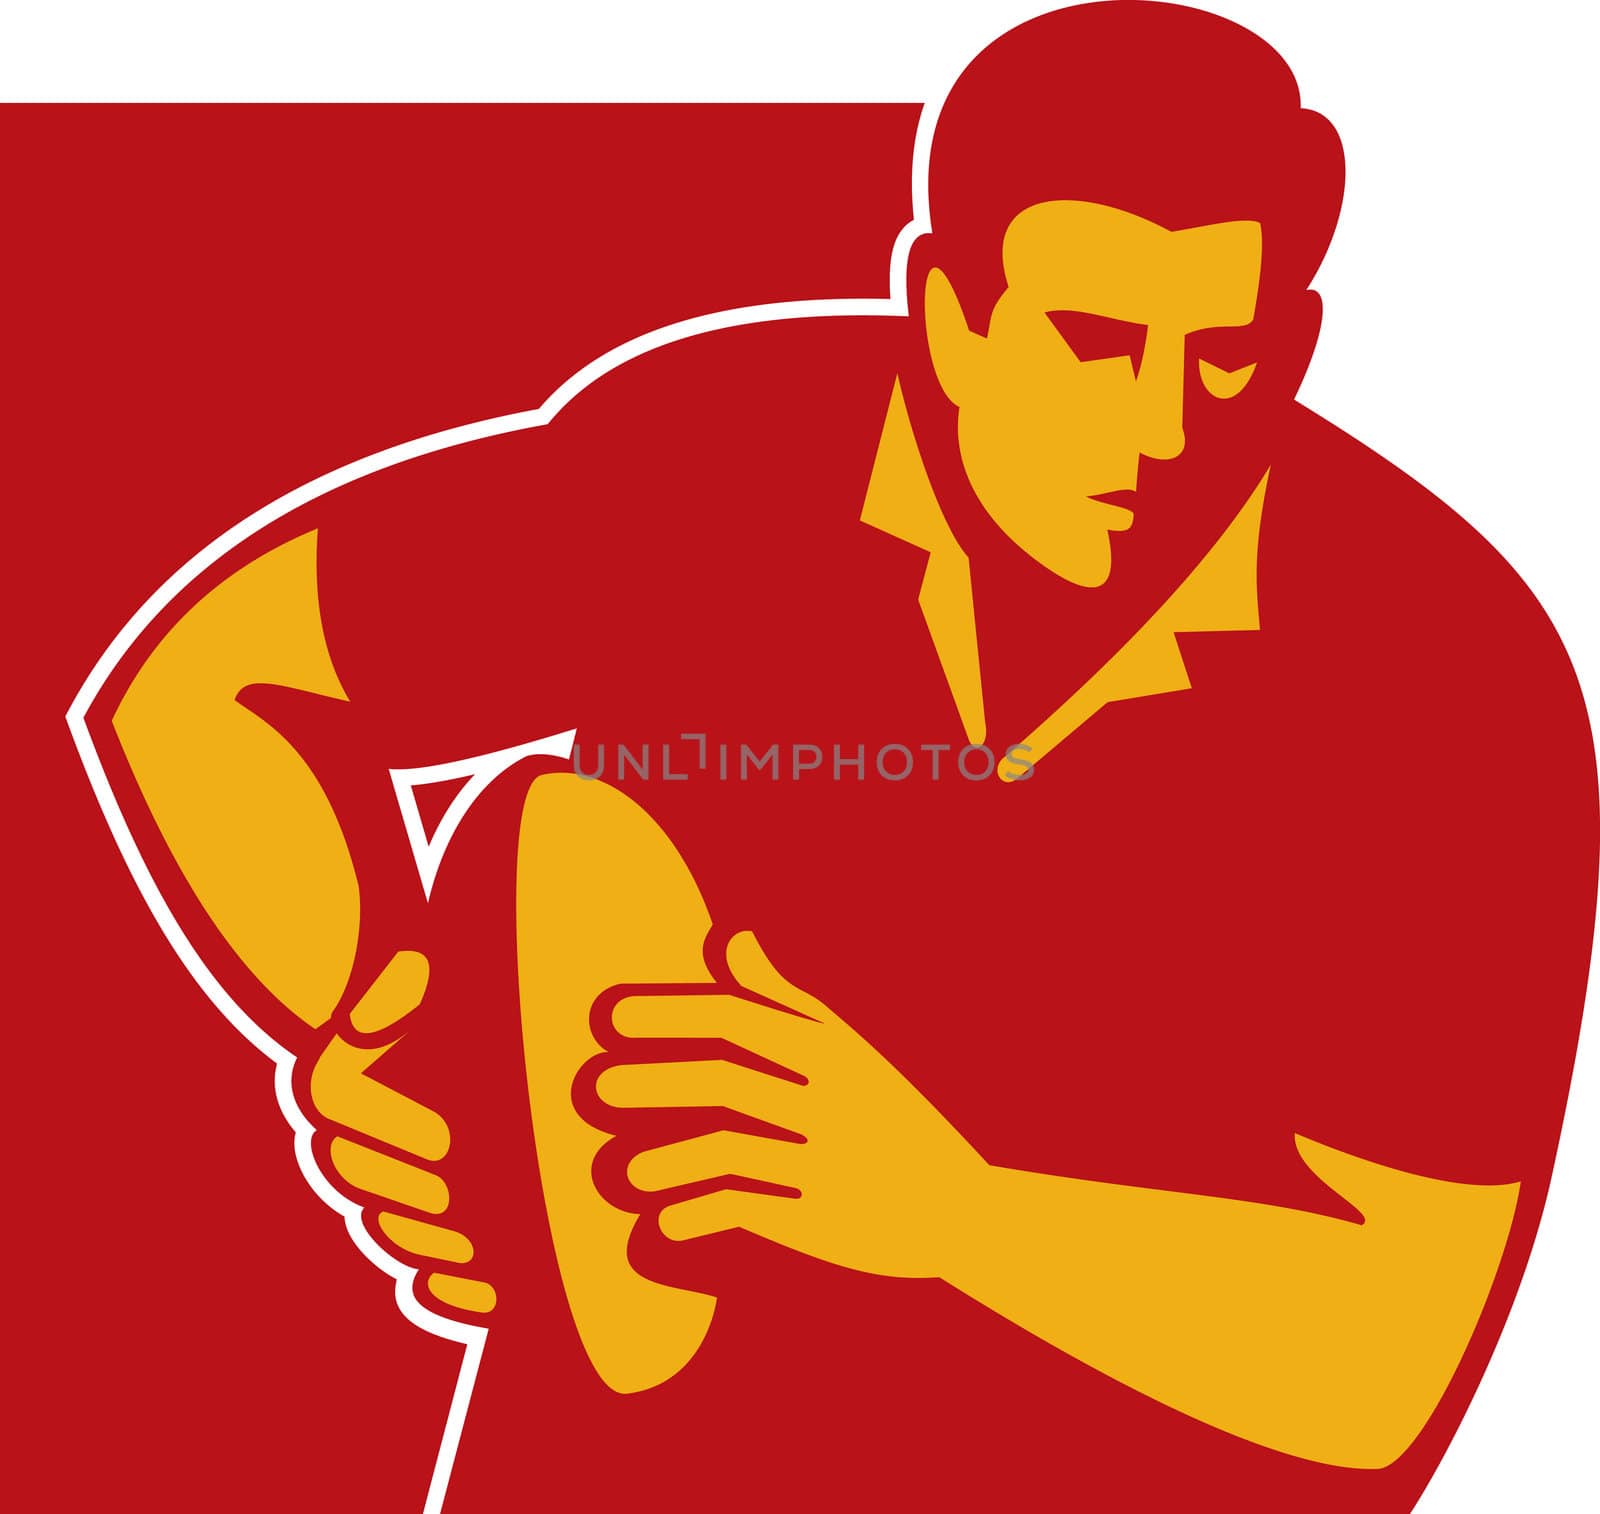 illustration of a rugby player running with the ball front